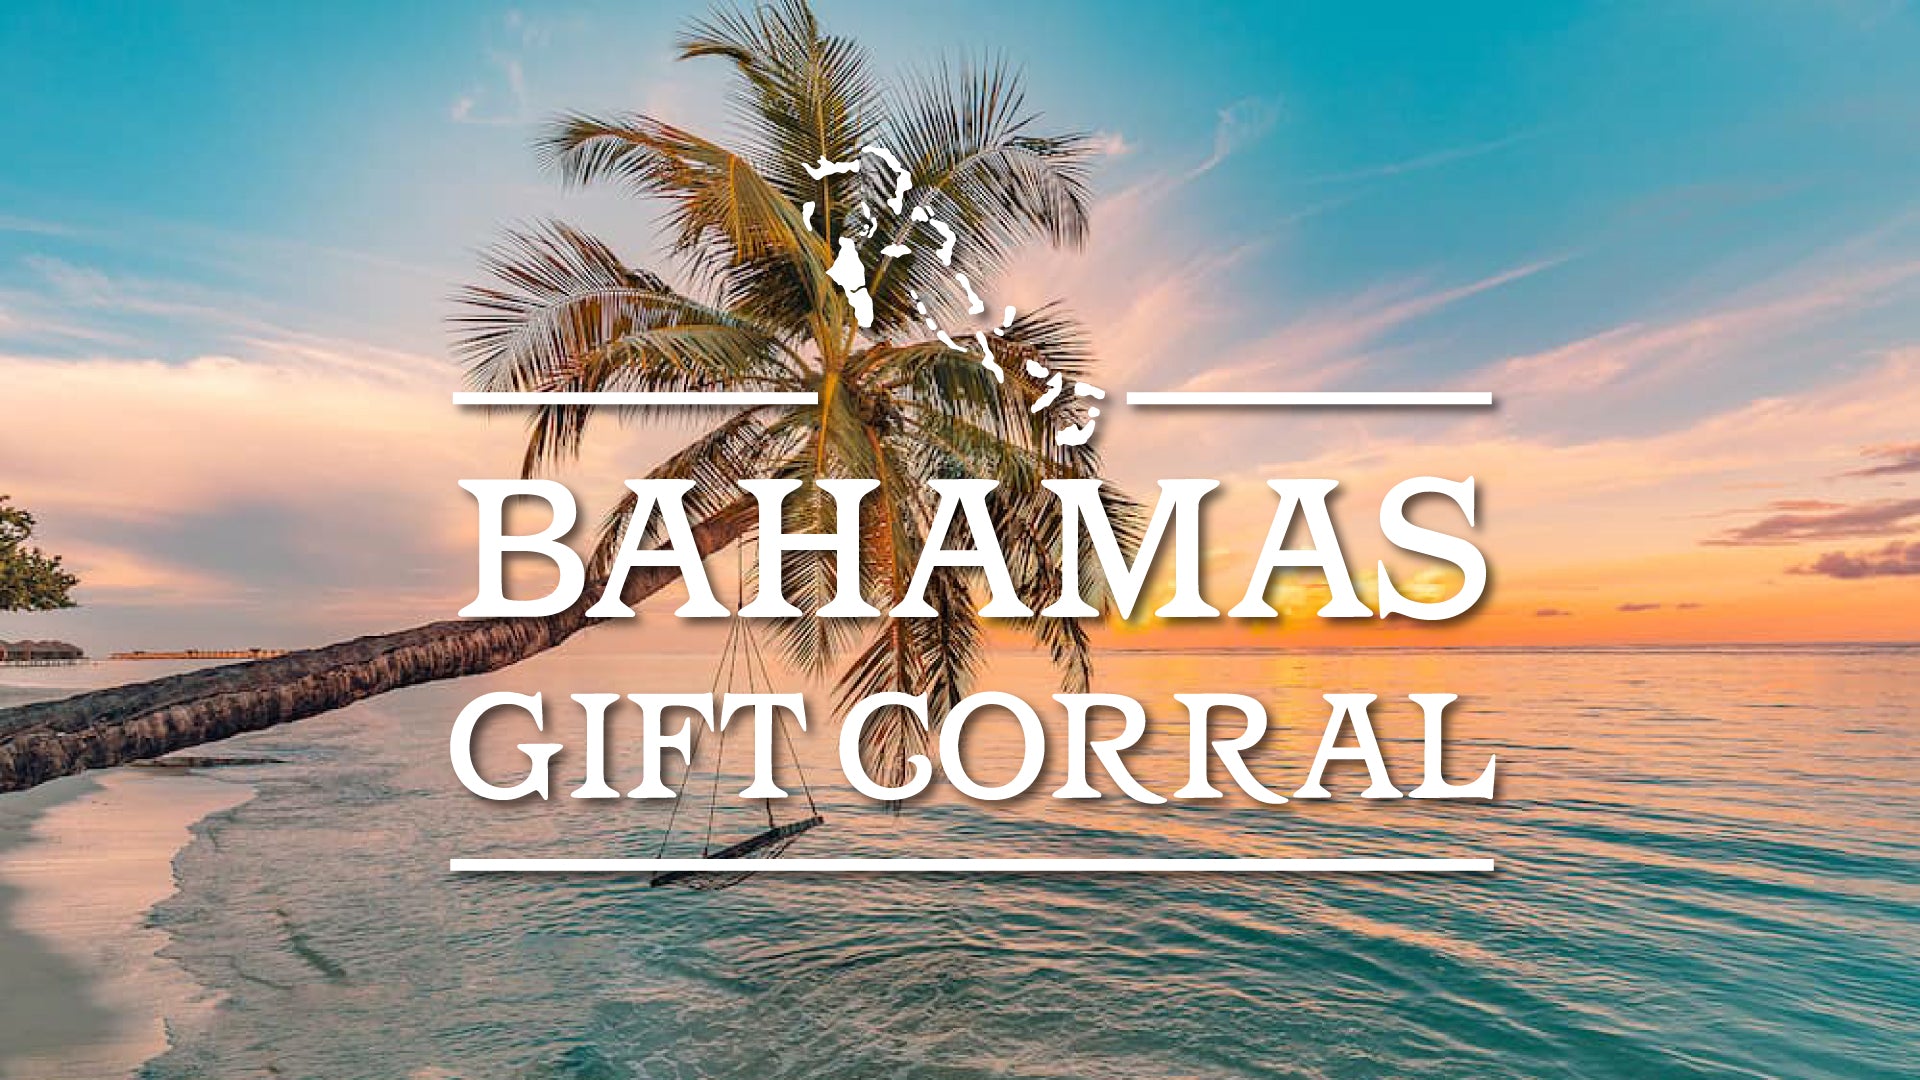 Now Introducing... Bahamas Gift Corral!